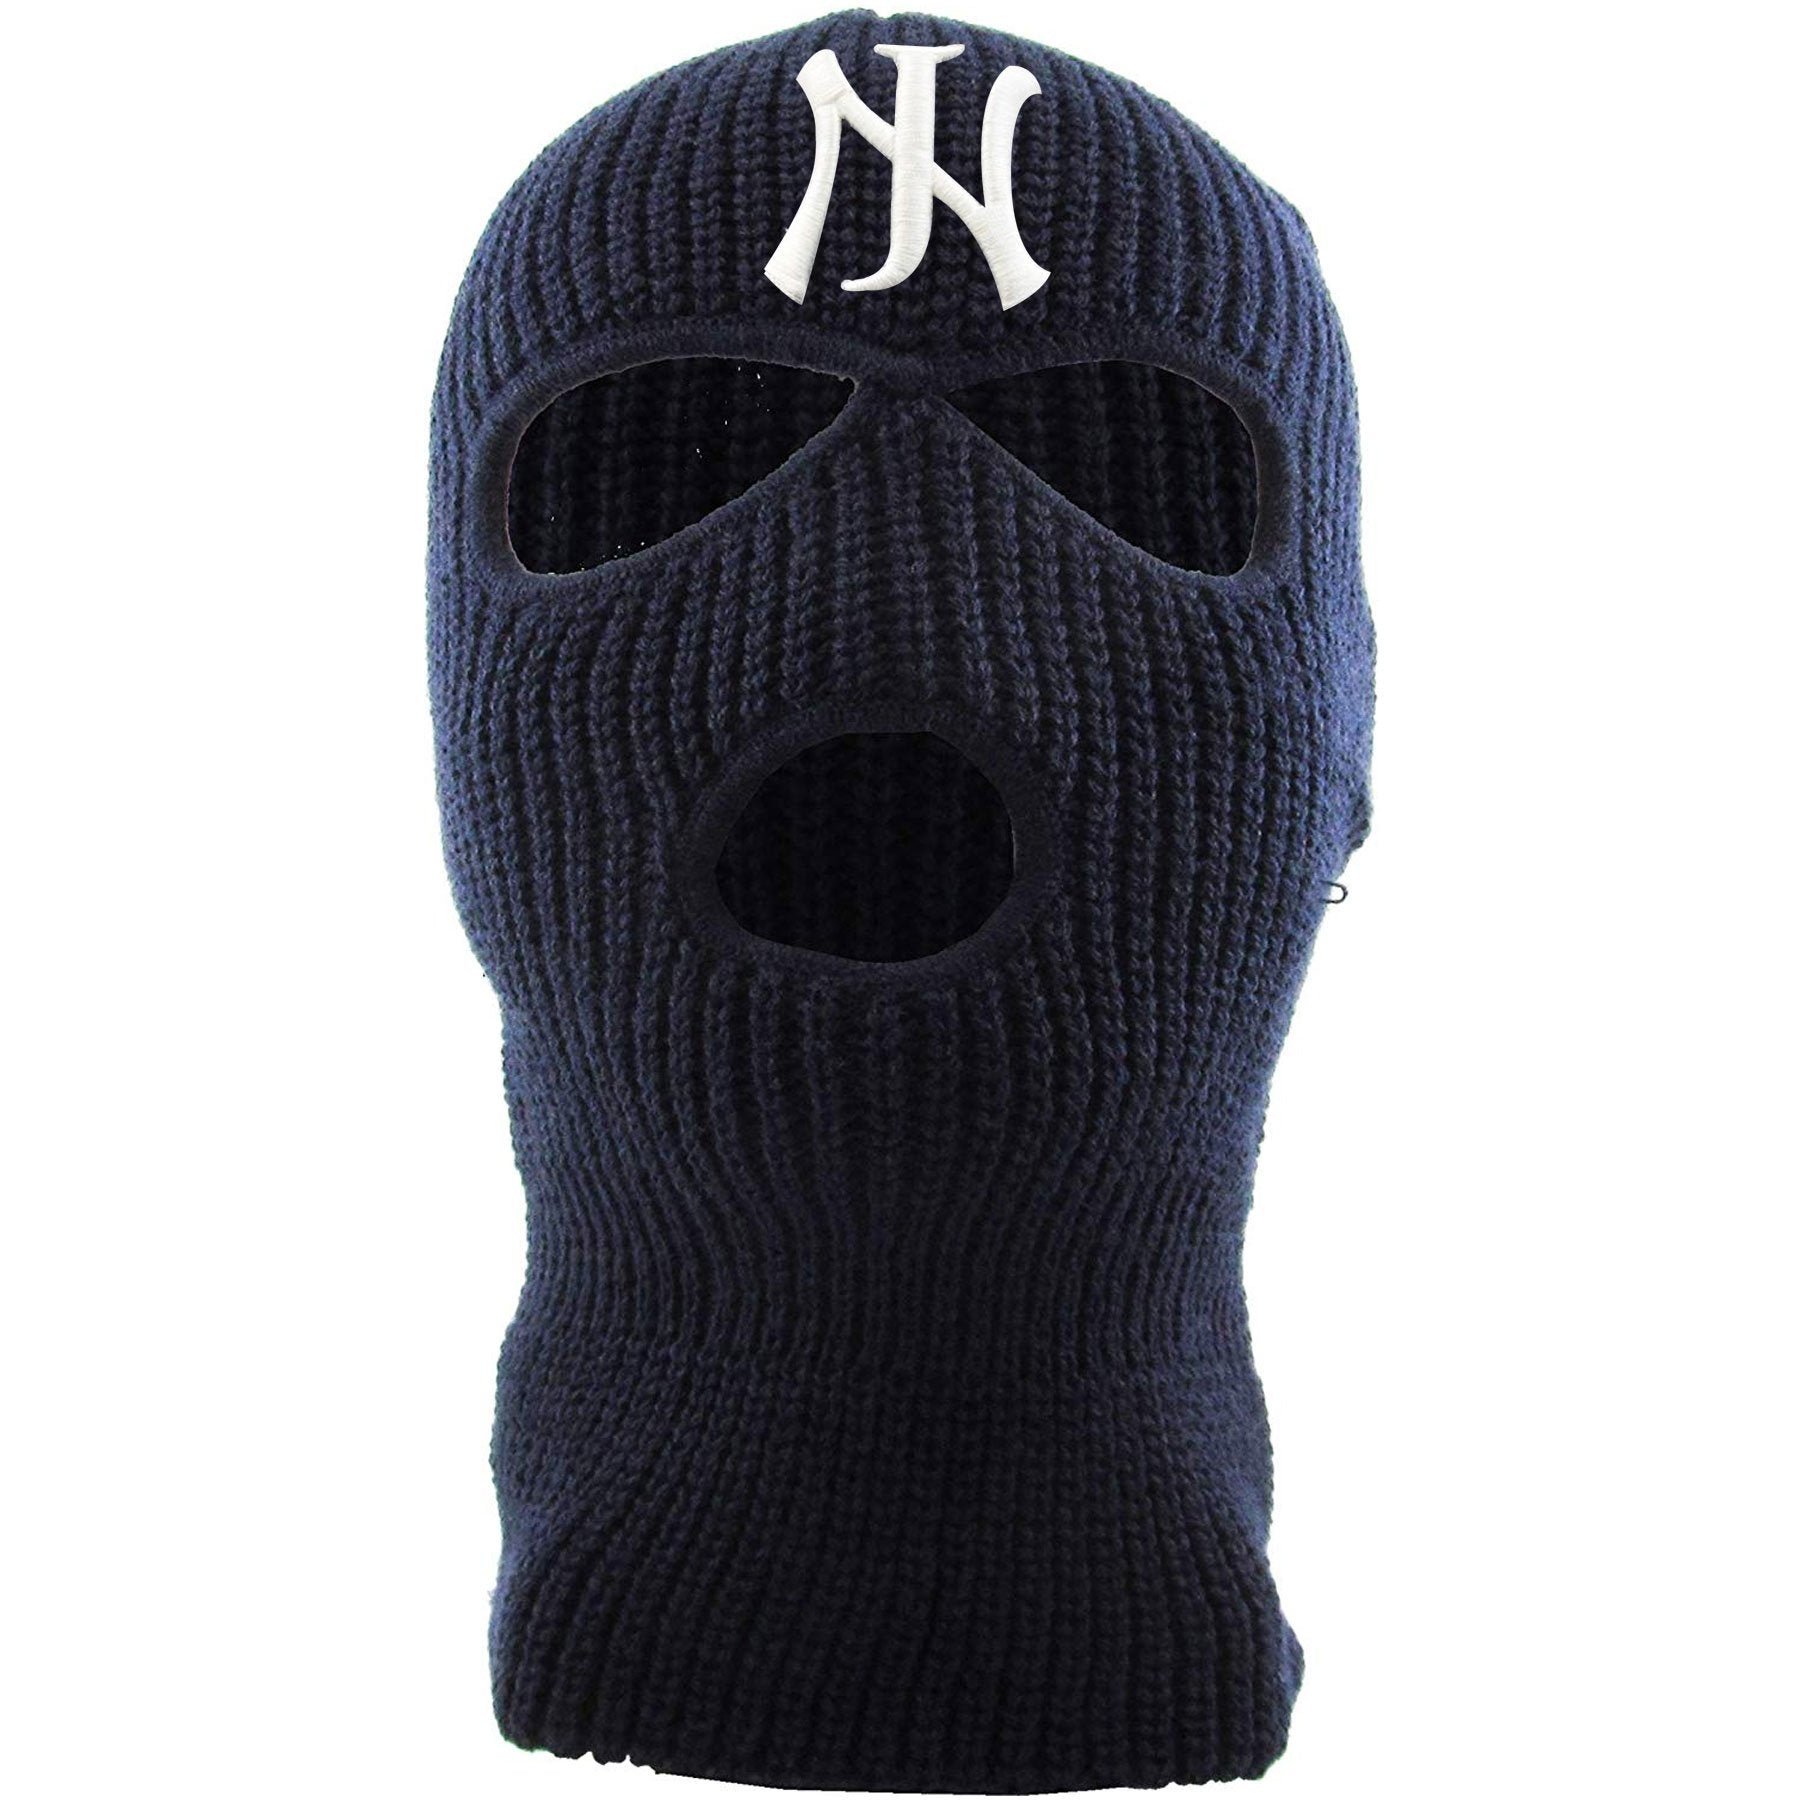 Embroidered on the forehead of the navy new jersey ski mask is the NJ logo